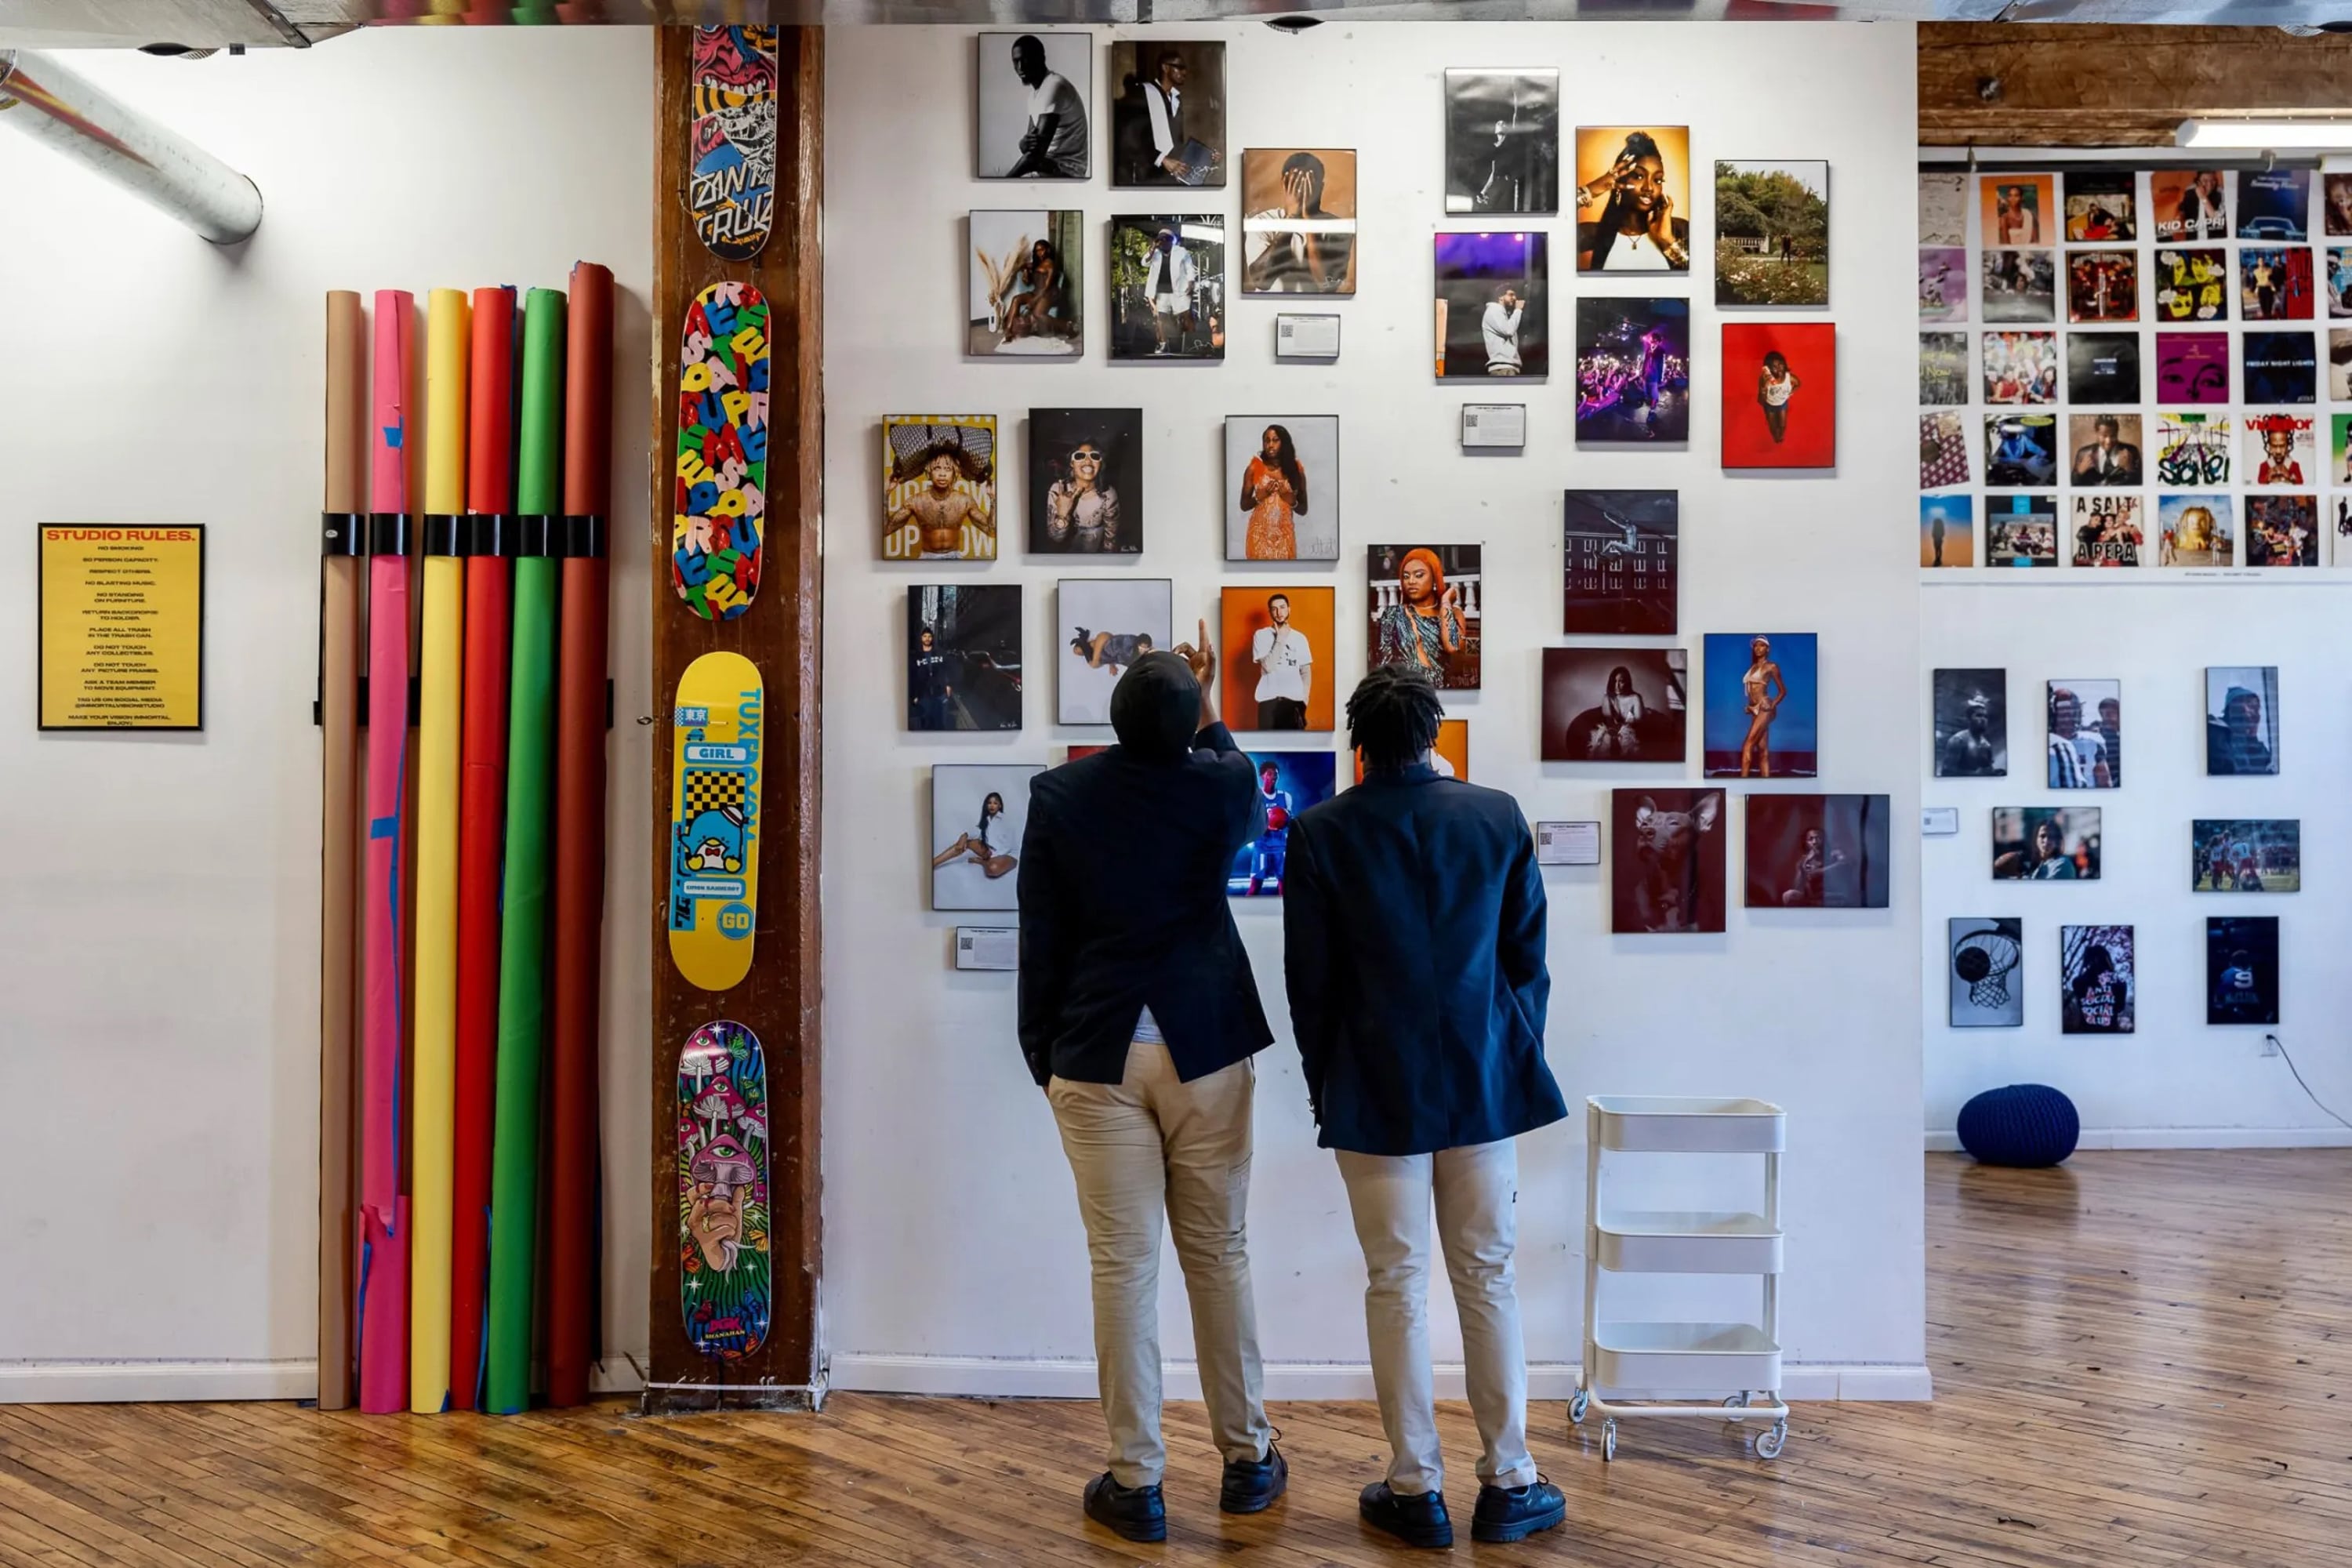 Two boys look up at photographs and skateboards hanging on a white wall.